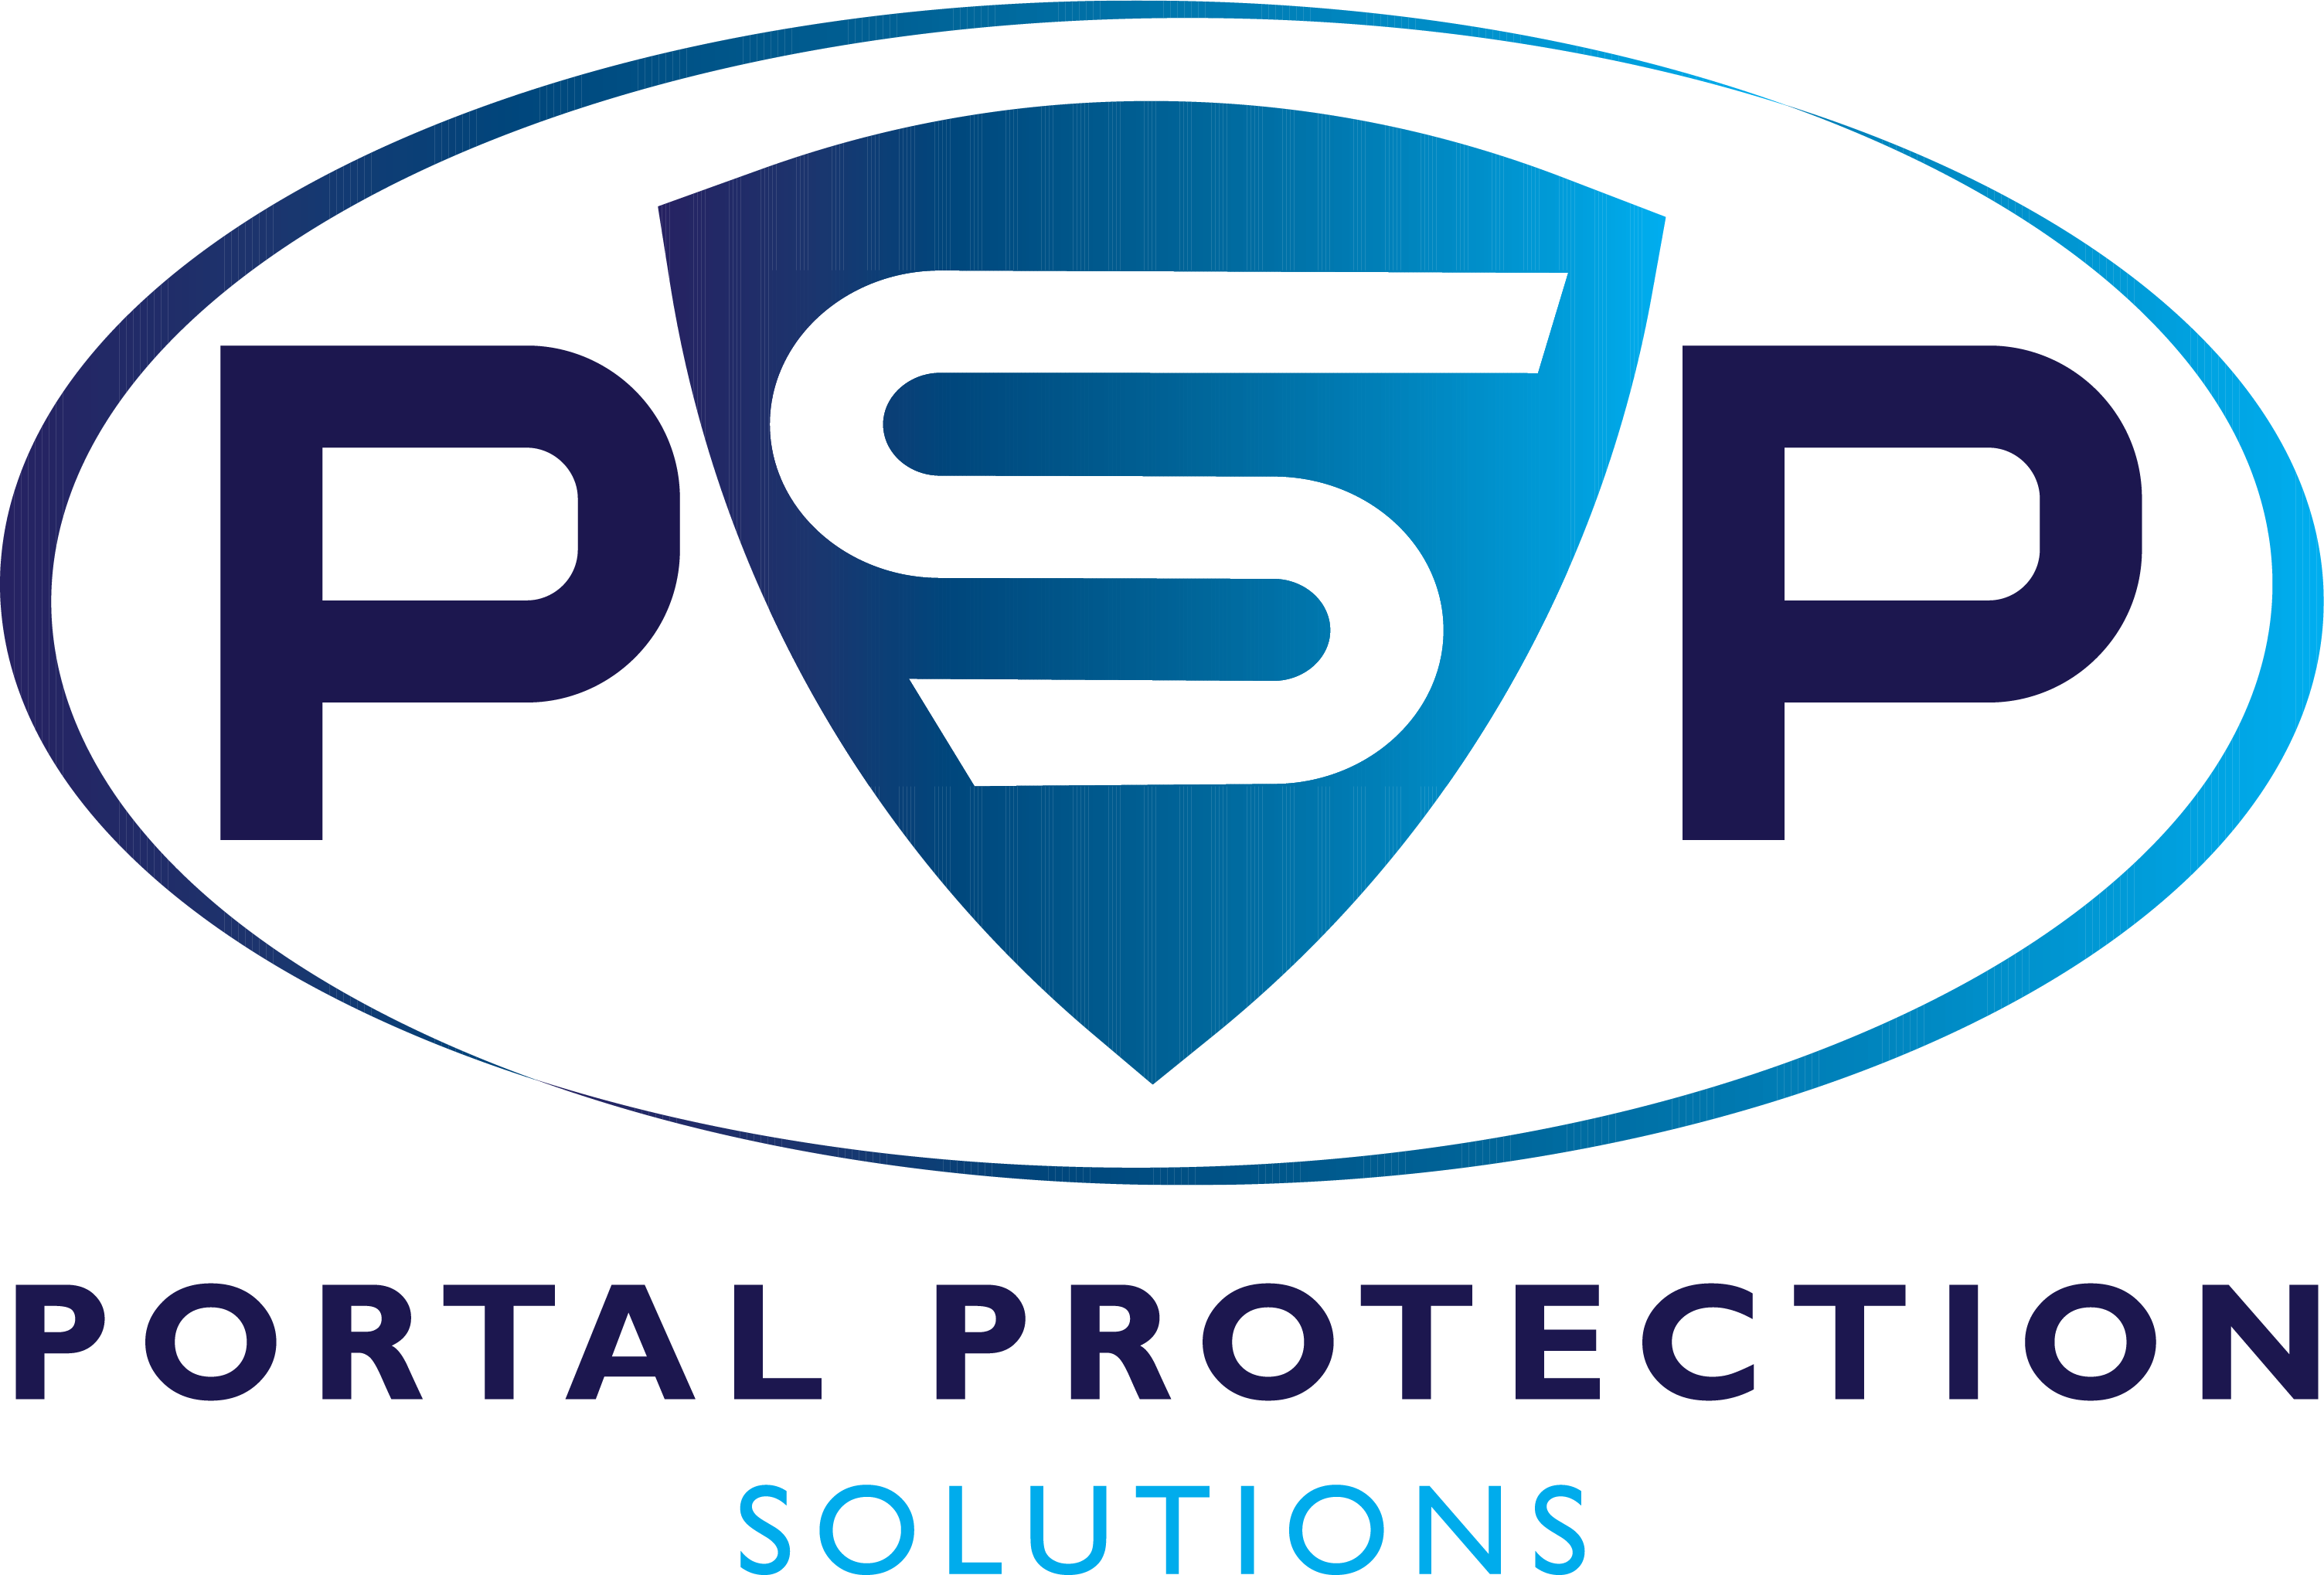 Portal Protection Solutions